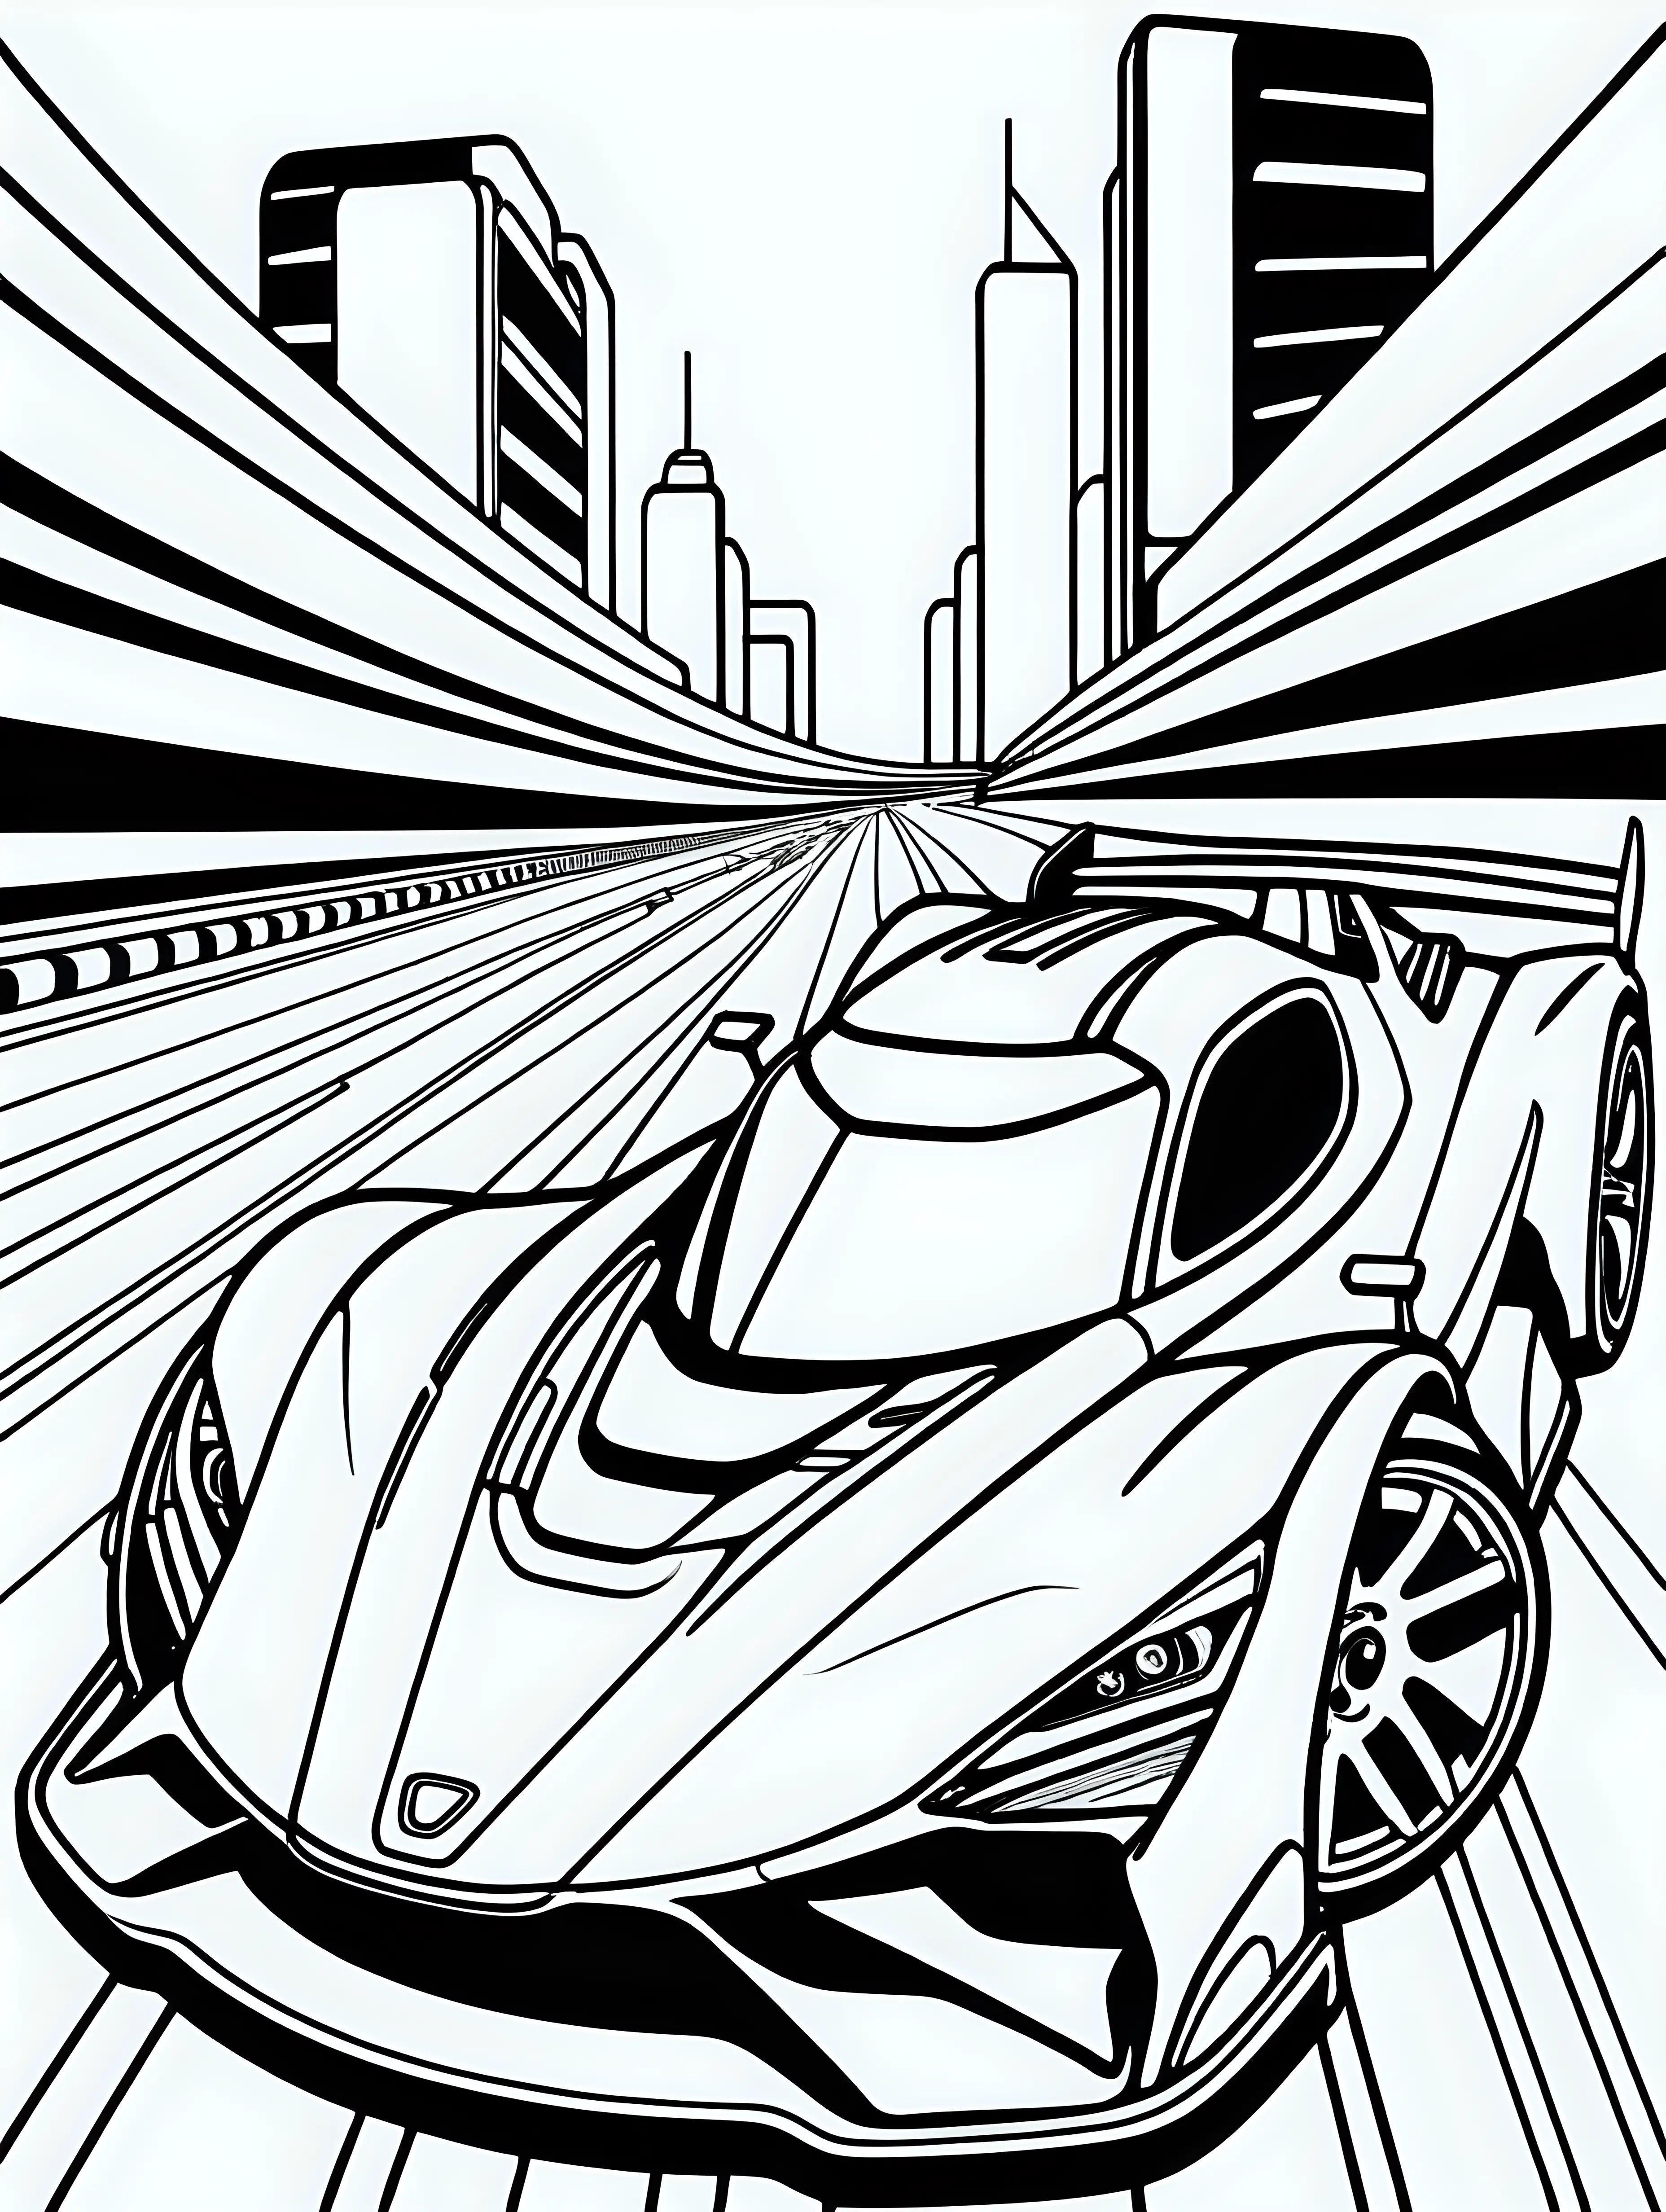 Futuristic Sport Car Coloring Page for Kids